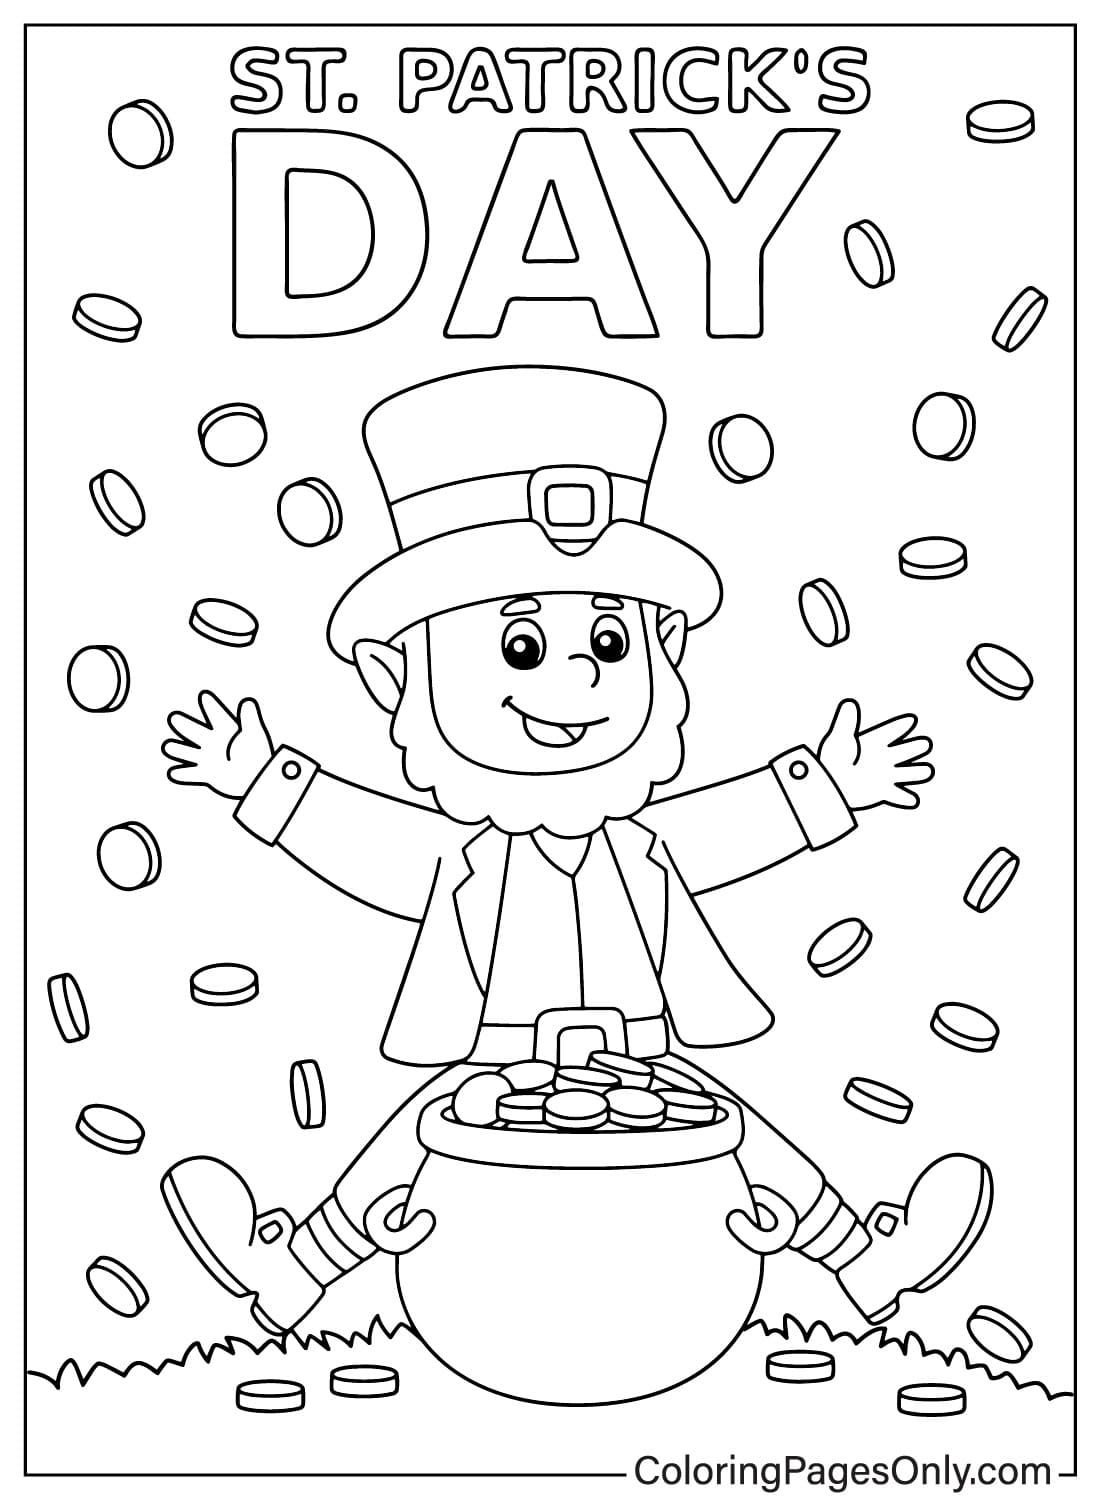 Printable Happy St. Patricks Day Coloring Page from Happy St. Patrick's Day